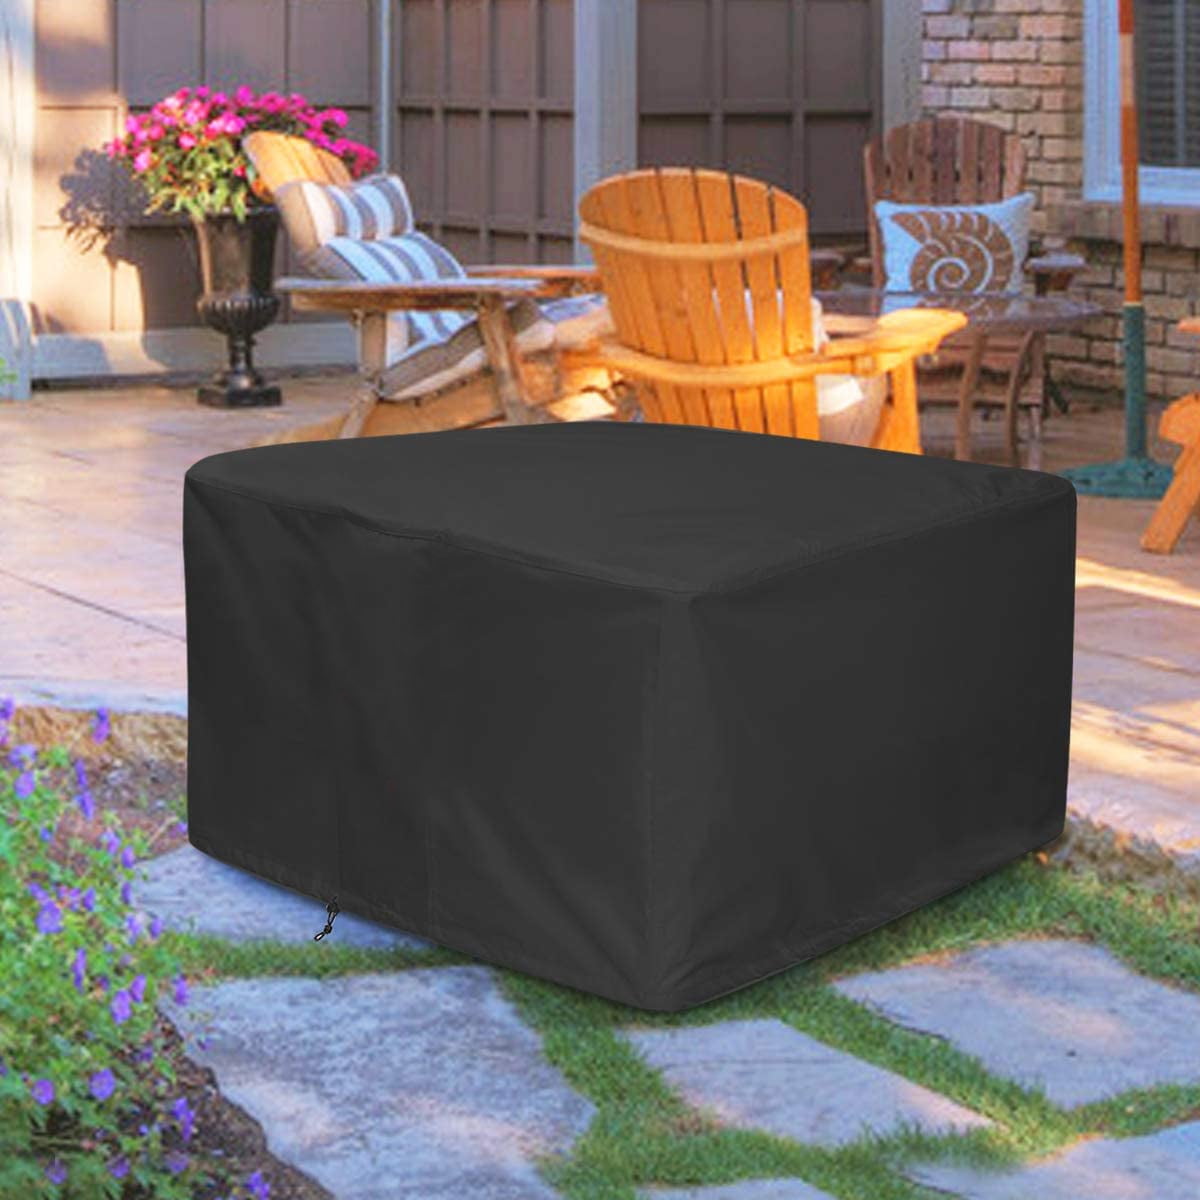 Kasla Fire Pit Table Cover Square 32 x 32 x 25 inch Black 600D Heavy Duty PVC Waterproof Windproof Outdoor Fireplace Cover for Patio Gas Firepit Furniture